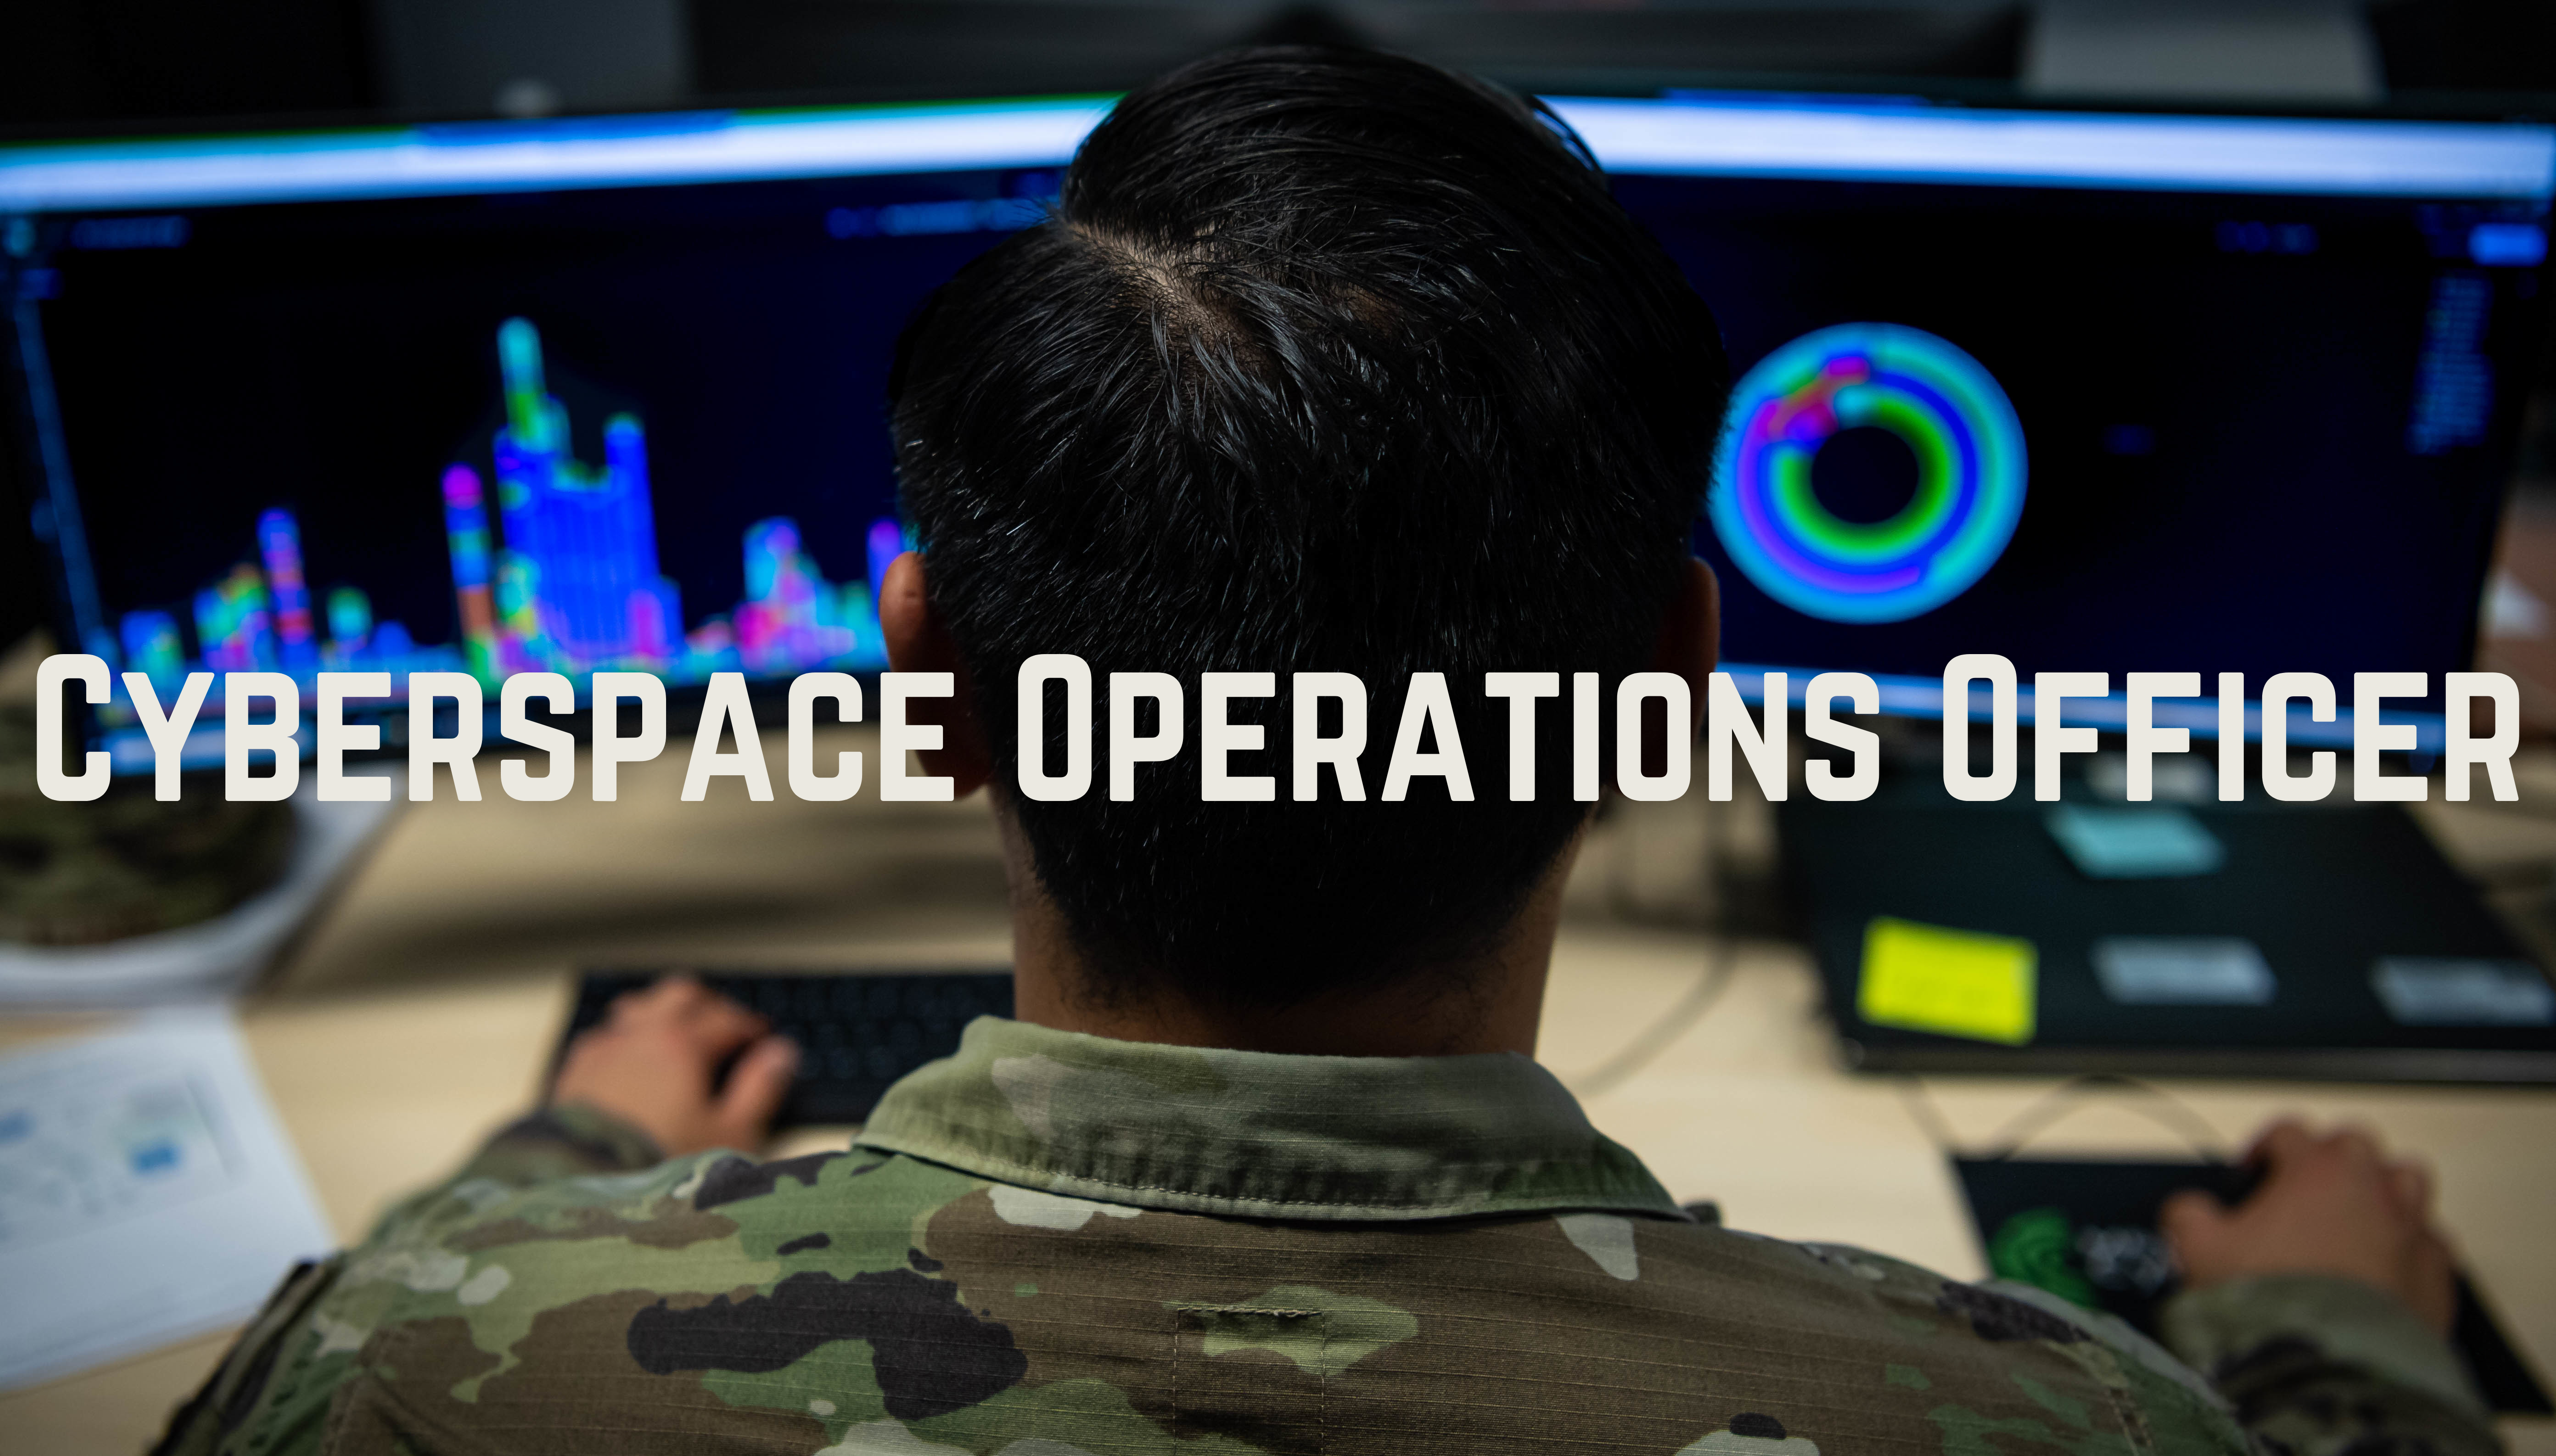 17x cyberspace operations officer